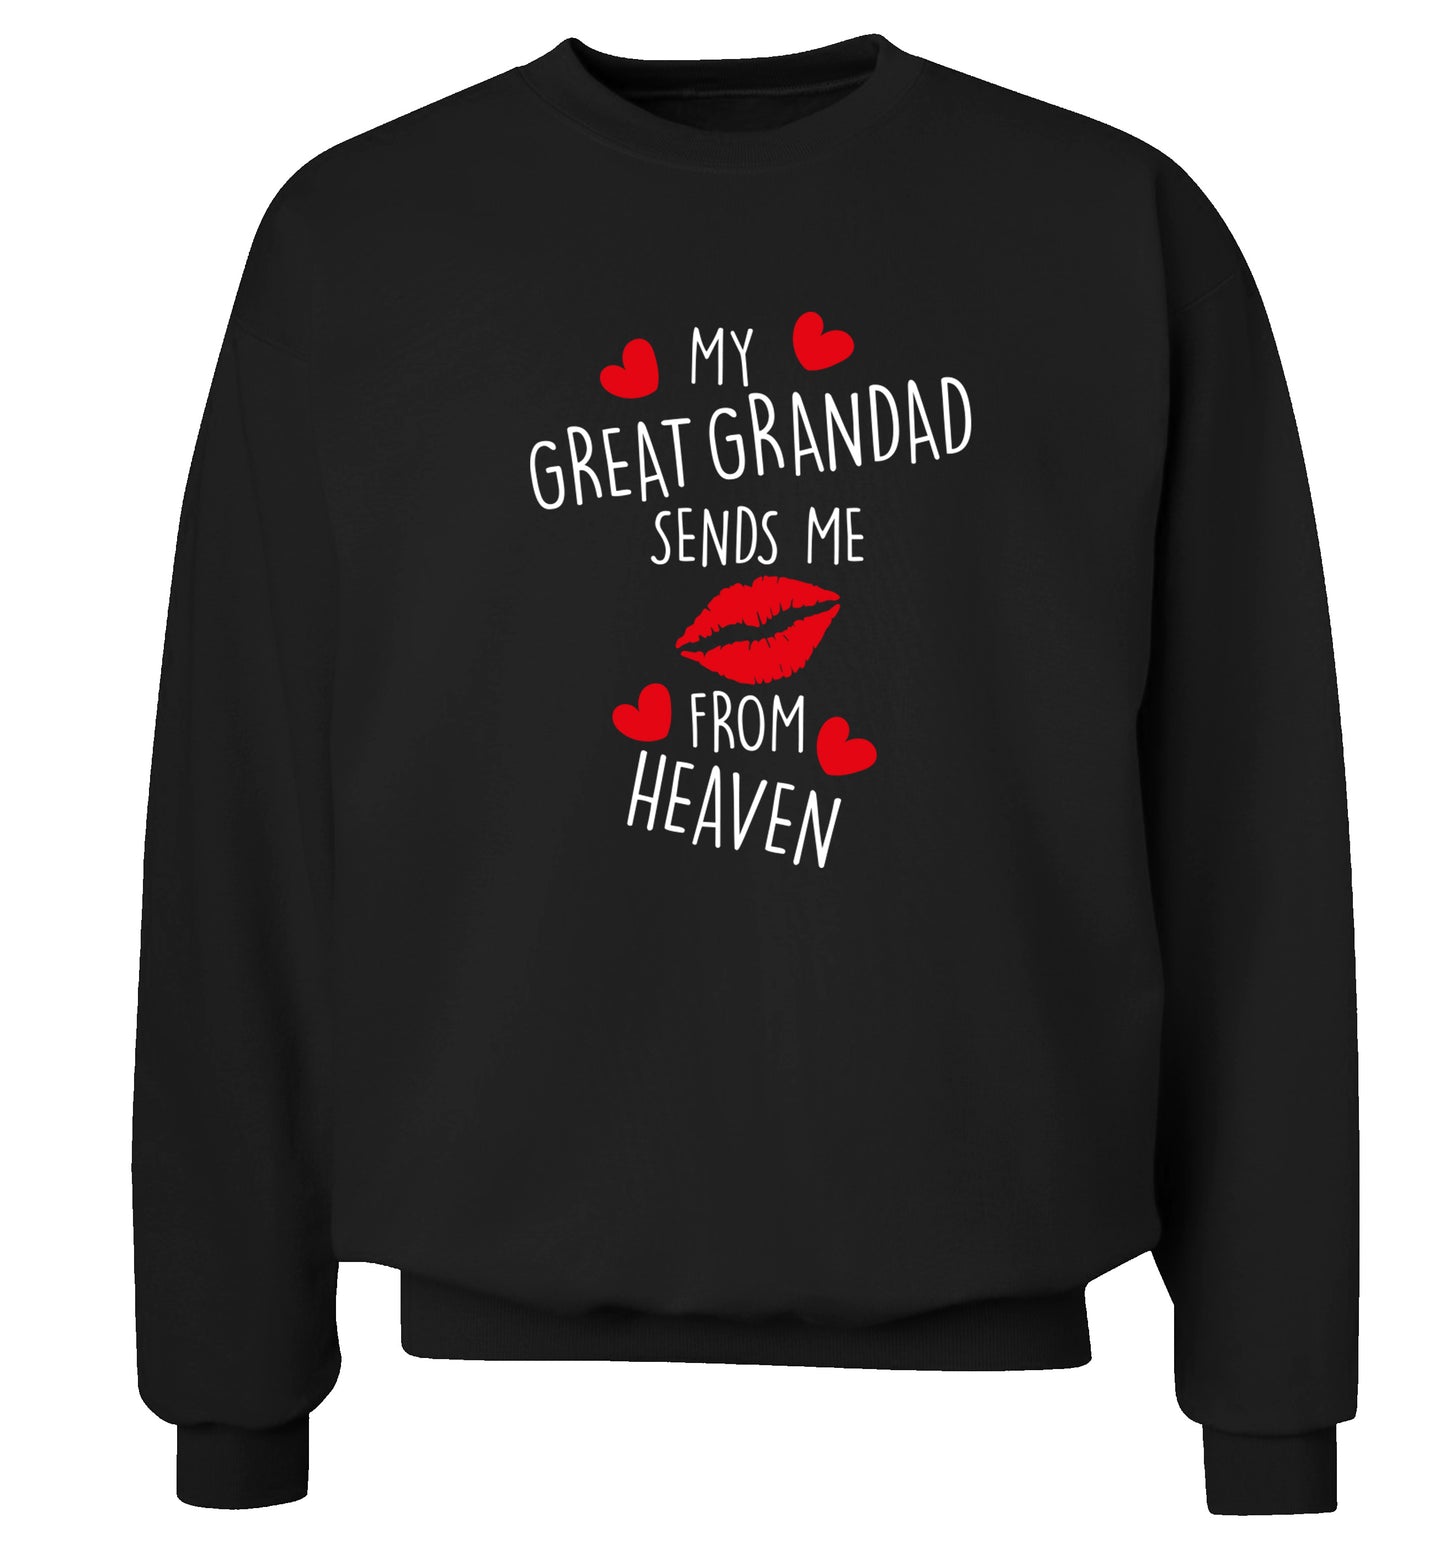 My great grandad sends me kisses from heaven Adult's unisex black Sweater 2XL